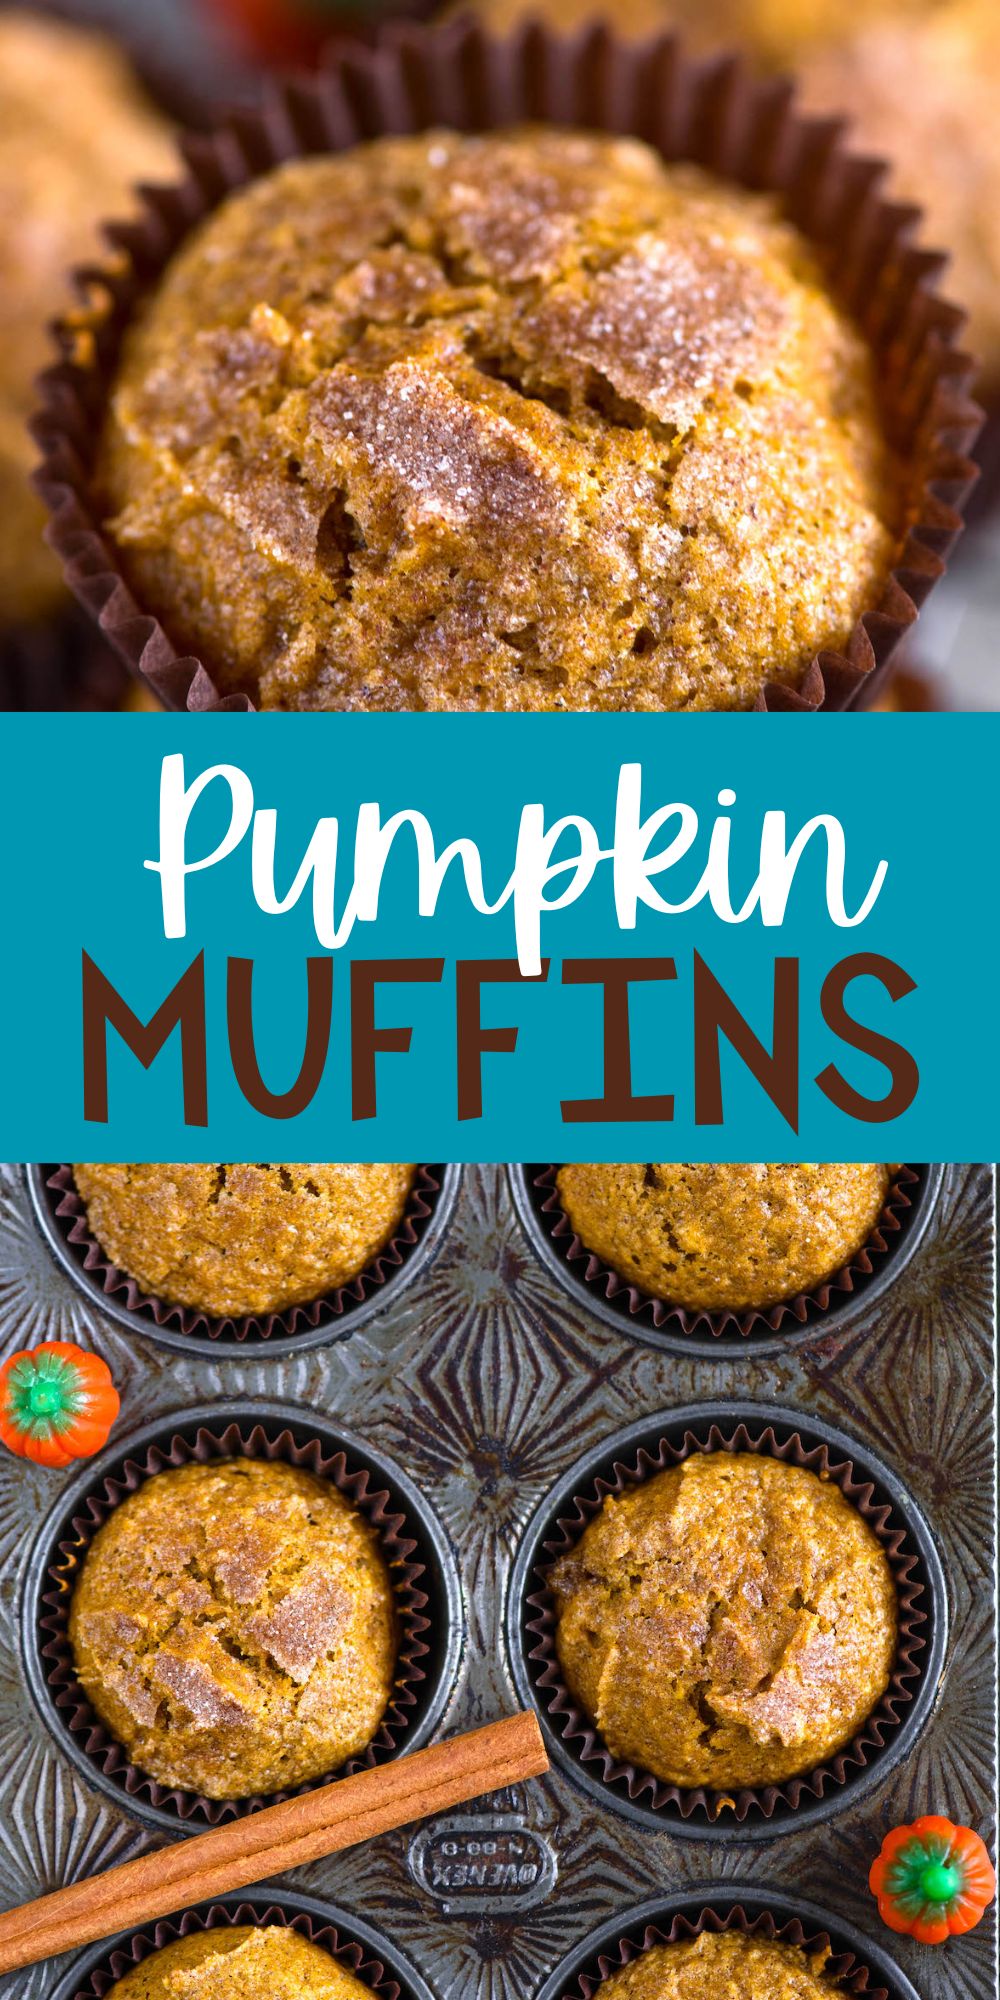 two photos of pumpkin muffins stacked in brown cupcake wrappers with words on the image.